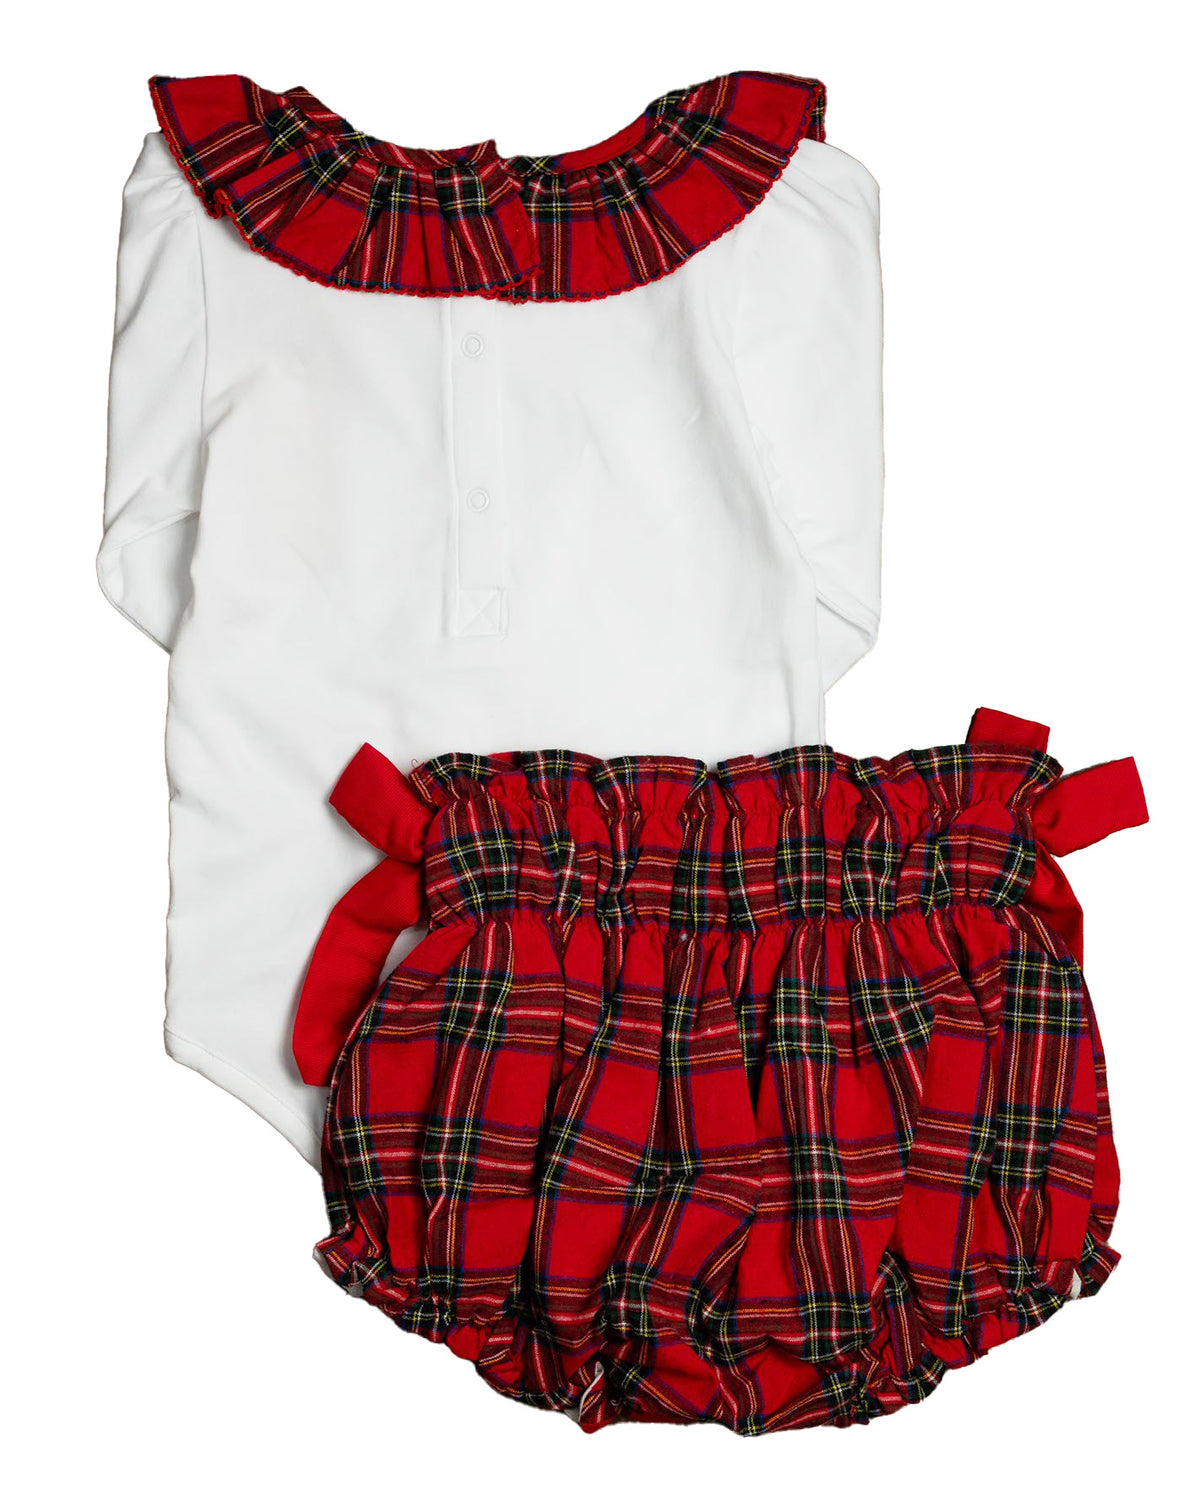 Red Tartan Plaid Smocked Bloomers with Peter Pan Body Suit